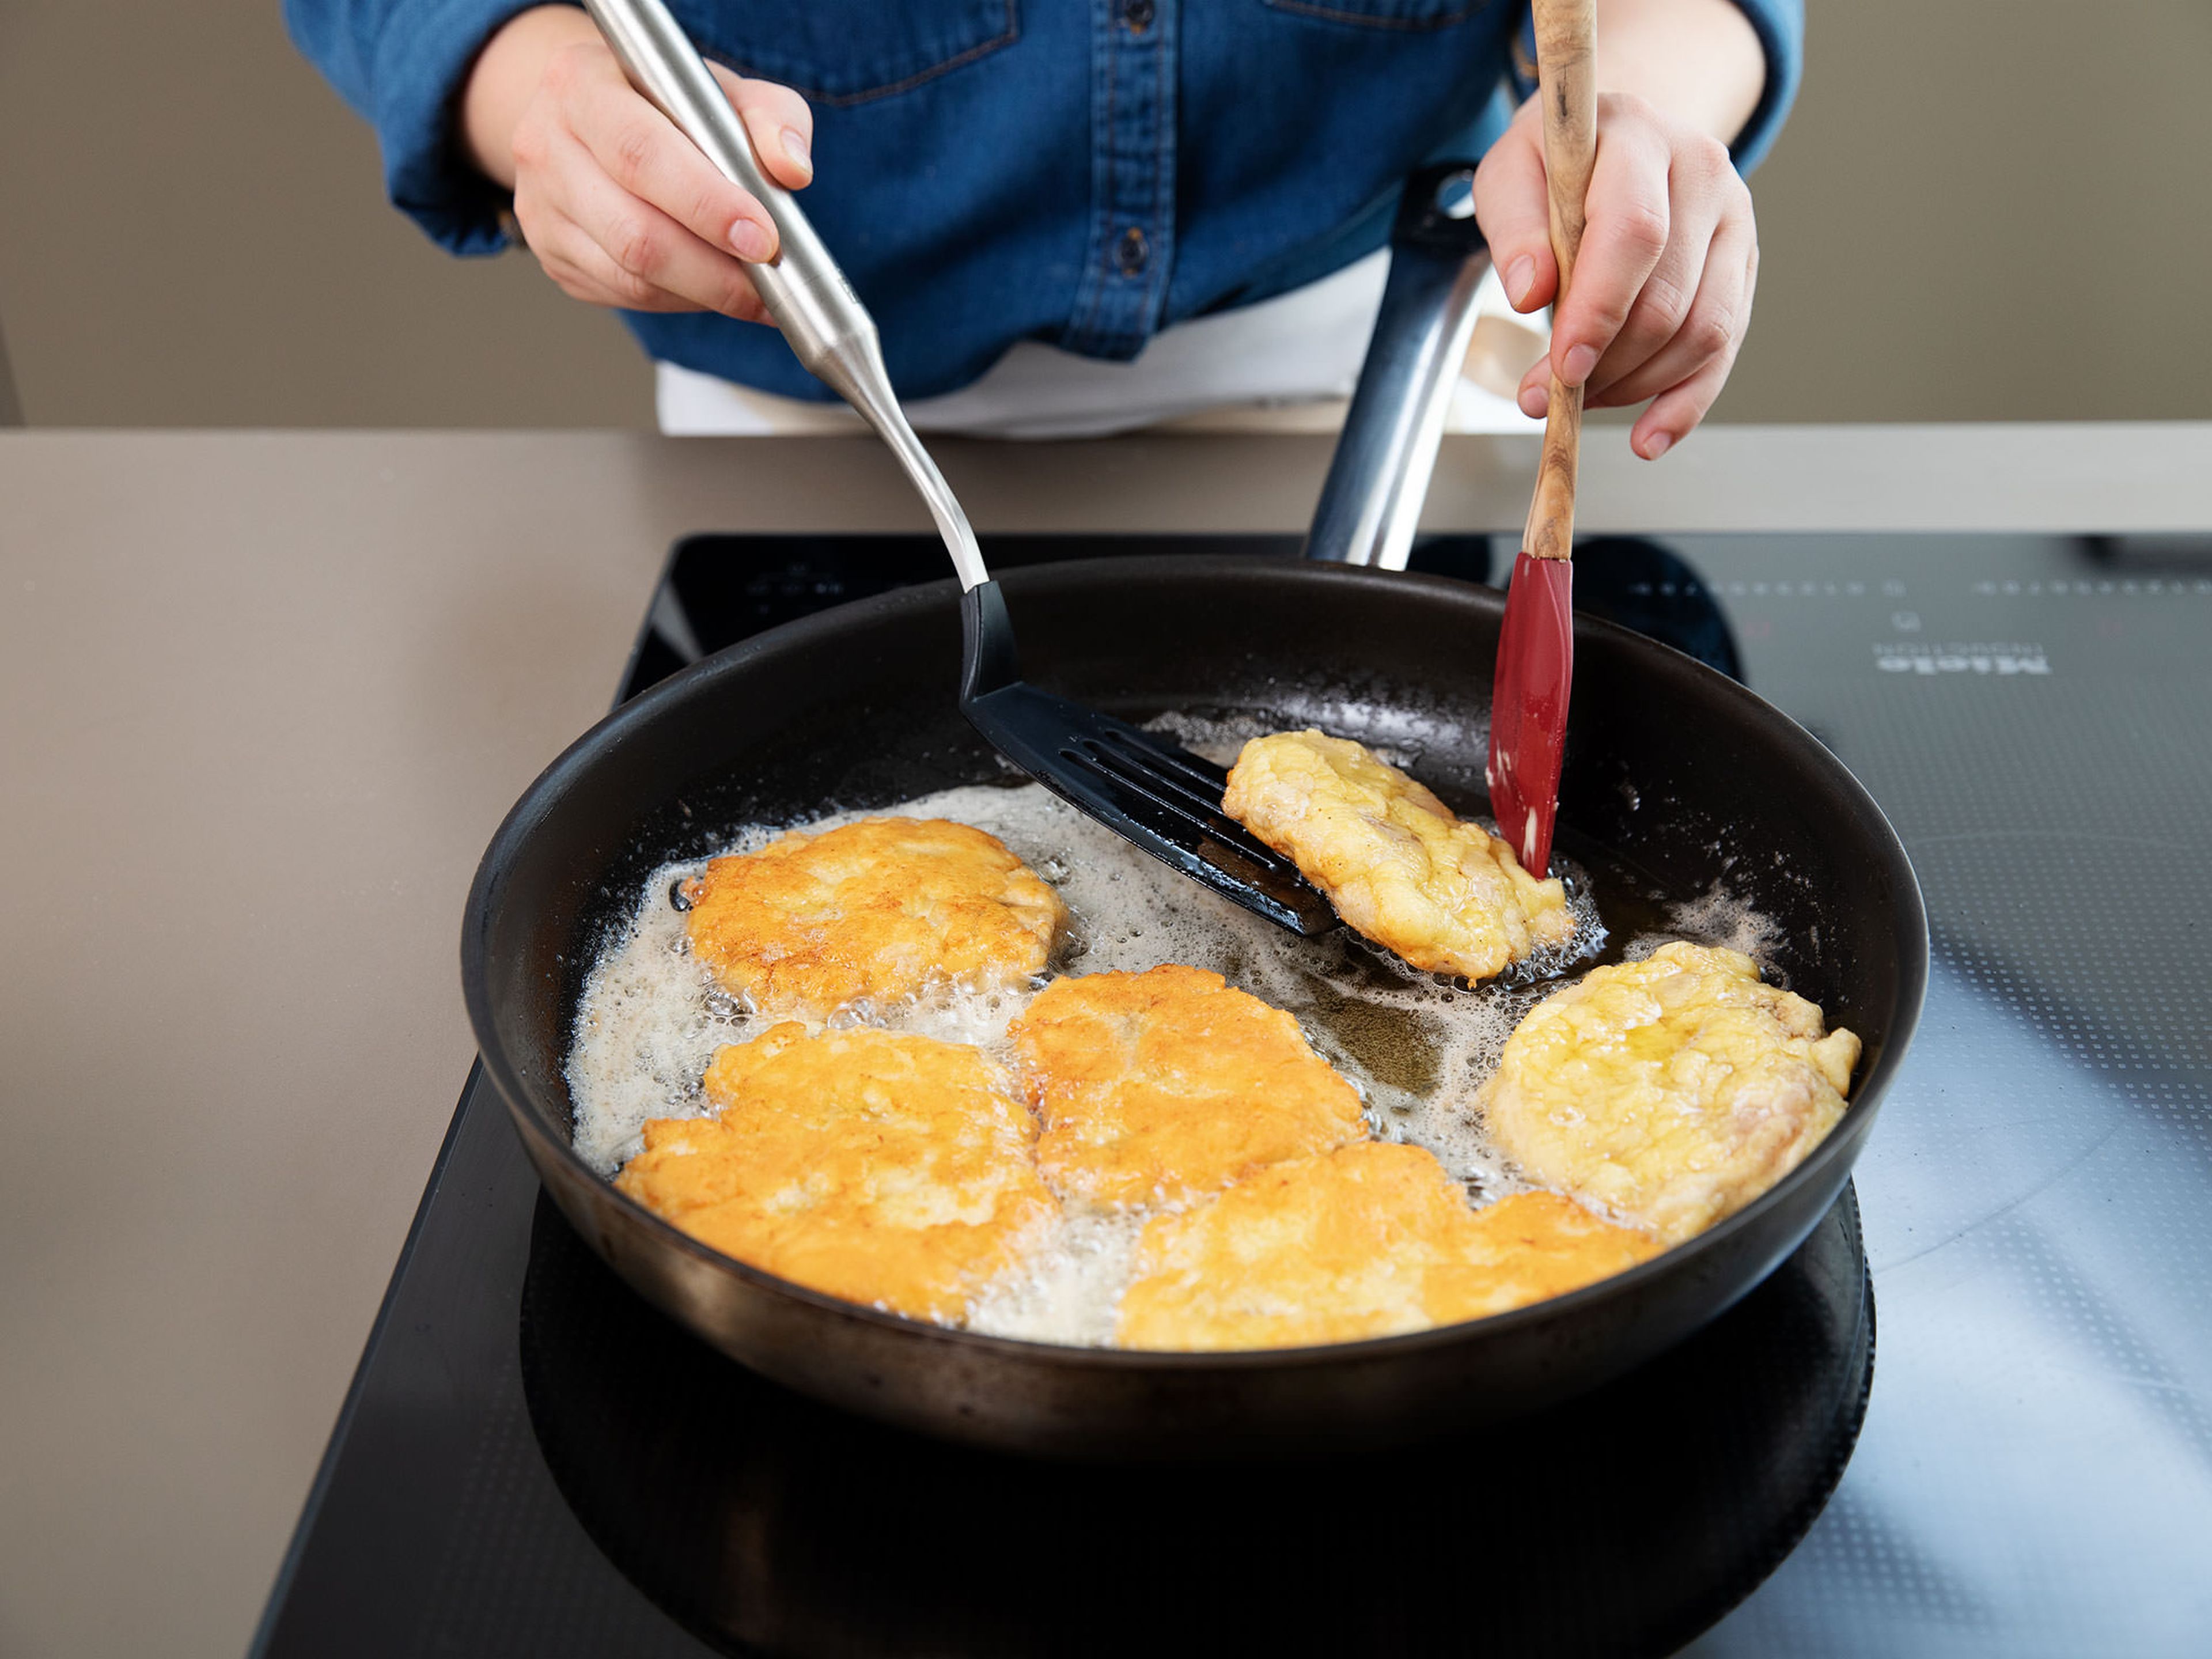 Heat vegetable oil in a frying pan over medium-high heat. Add butter and fry chicken cutlets for approx. 2 - 3 min., until crispy and golden brown. Transfer to paper towel and let drain.